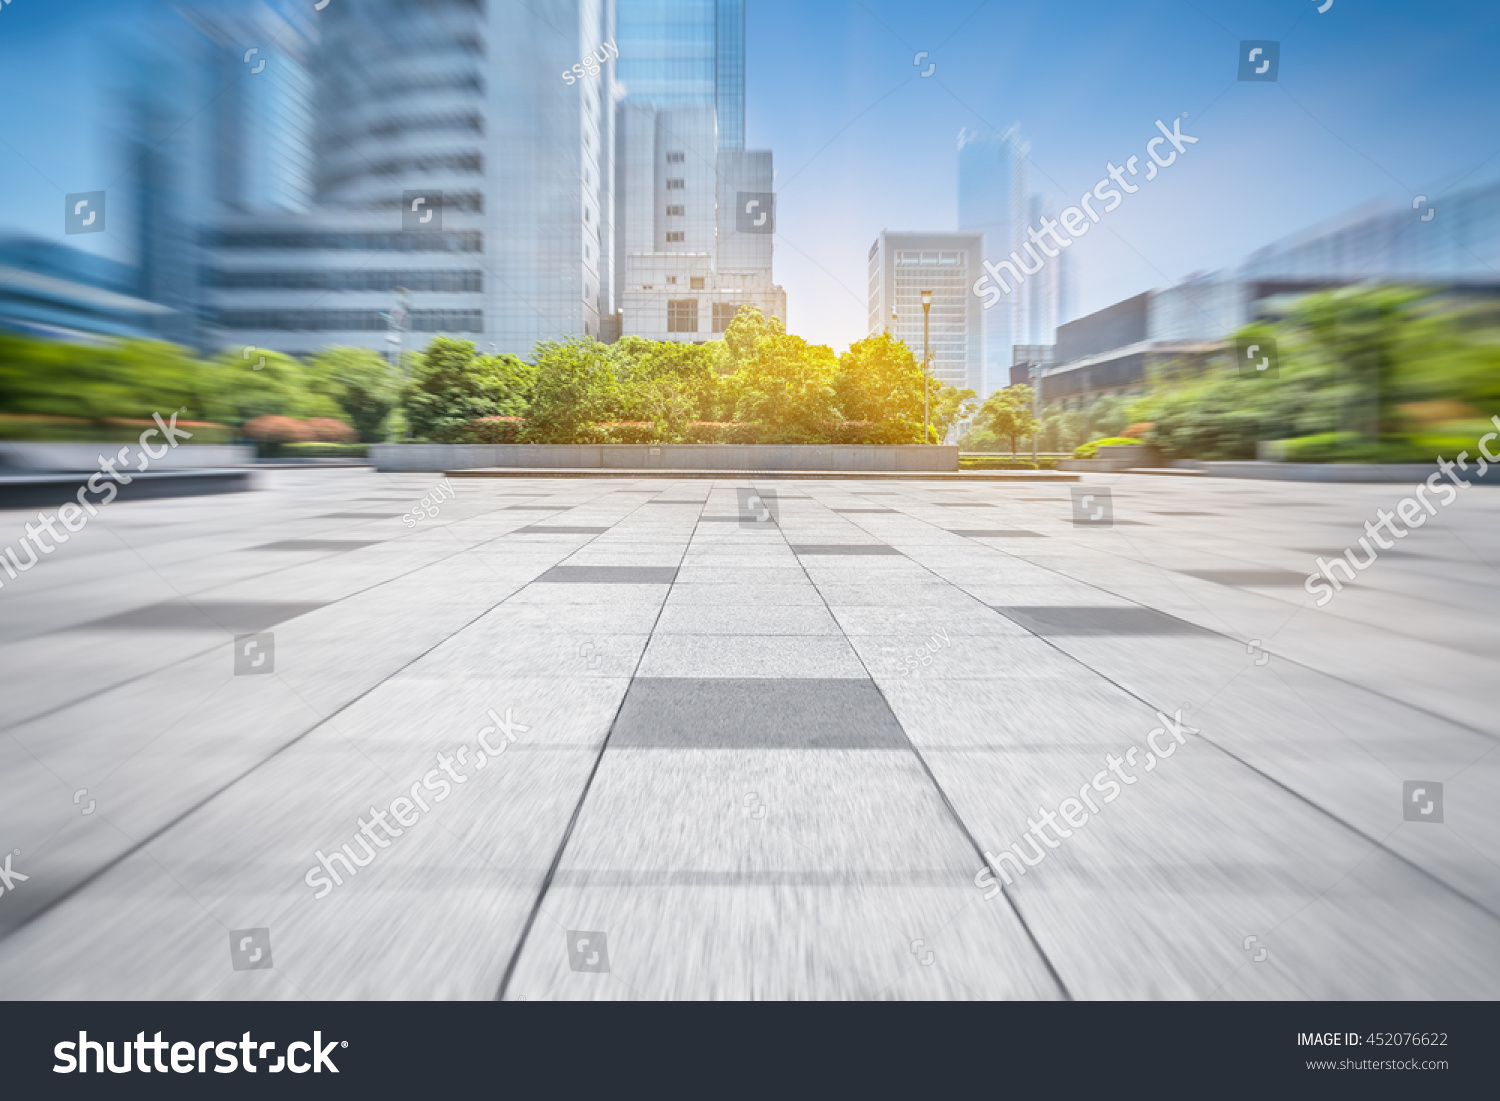 empty pavement and modern buildings in city #452076622